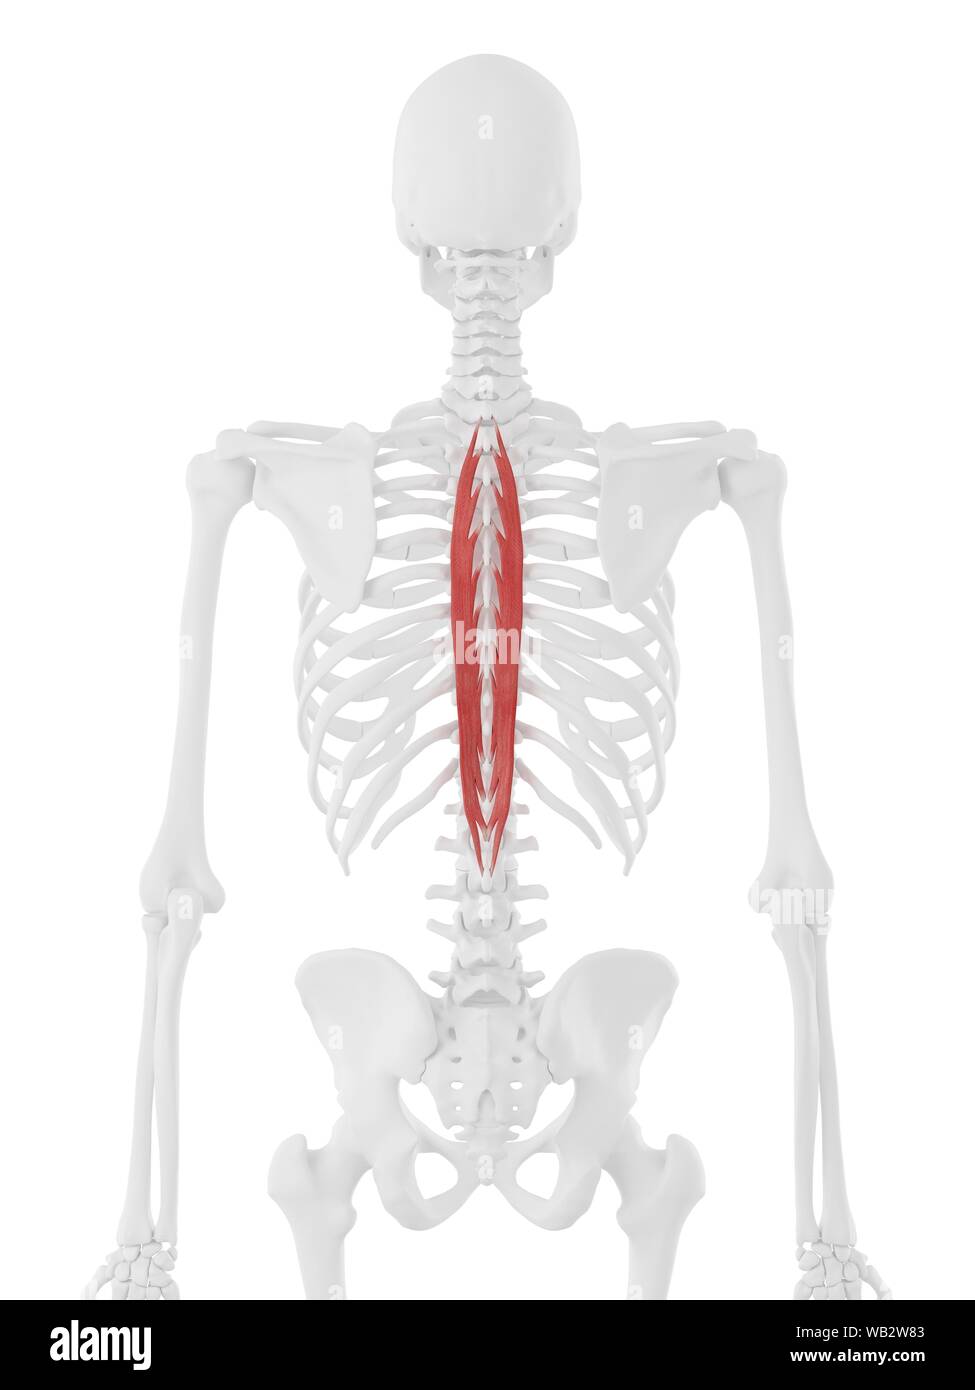 Spinalis thoracis muscle, computer illustration. Stock Photo